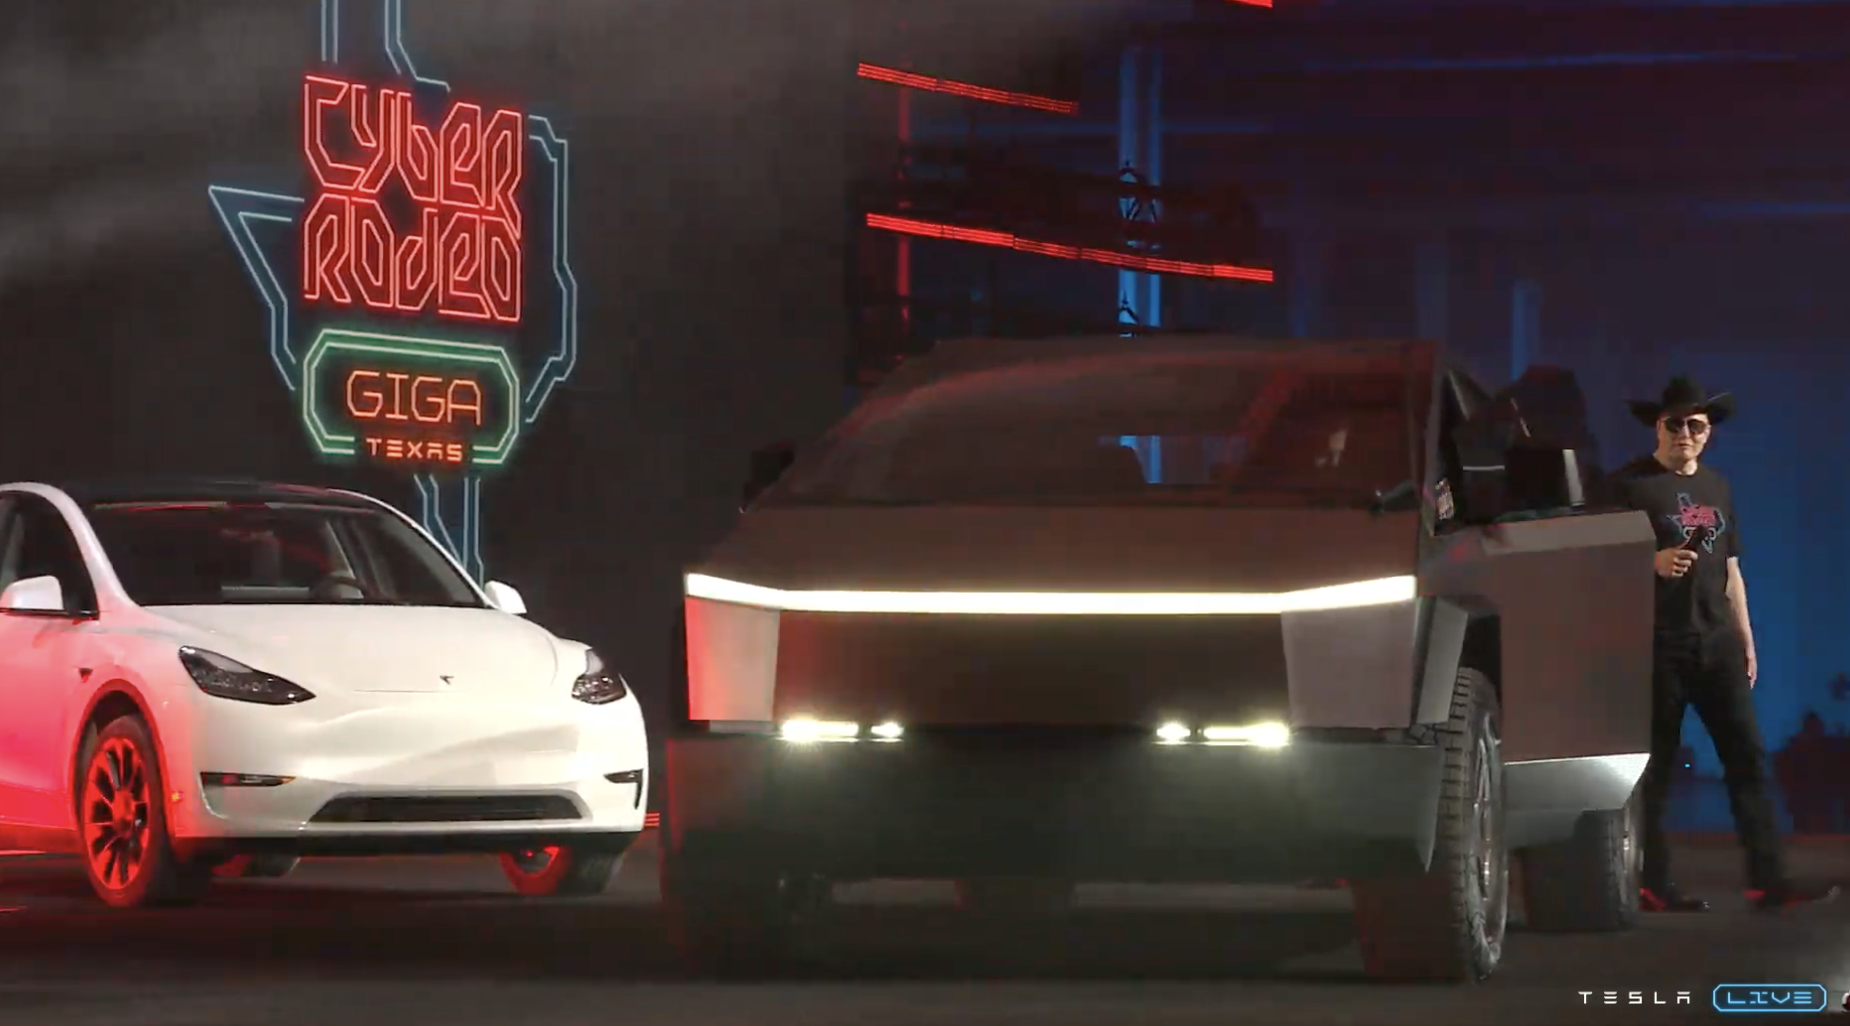 Tesla Cybertruck Deliveries Begin: Does the Edgy EV Live Up to the